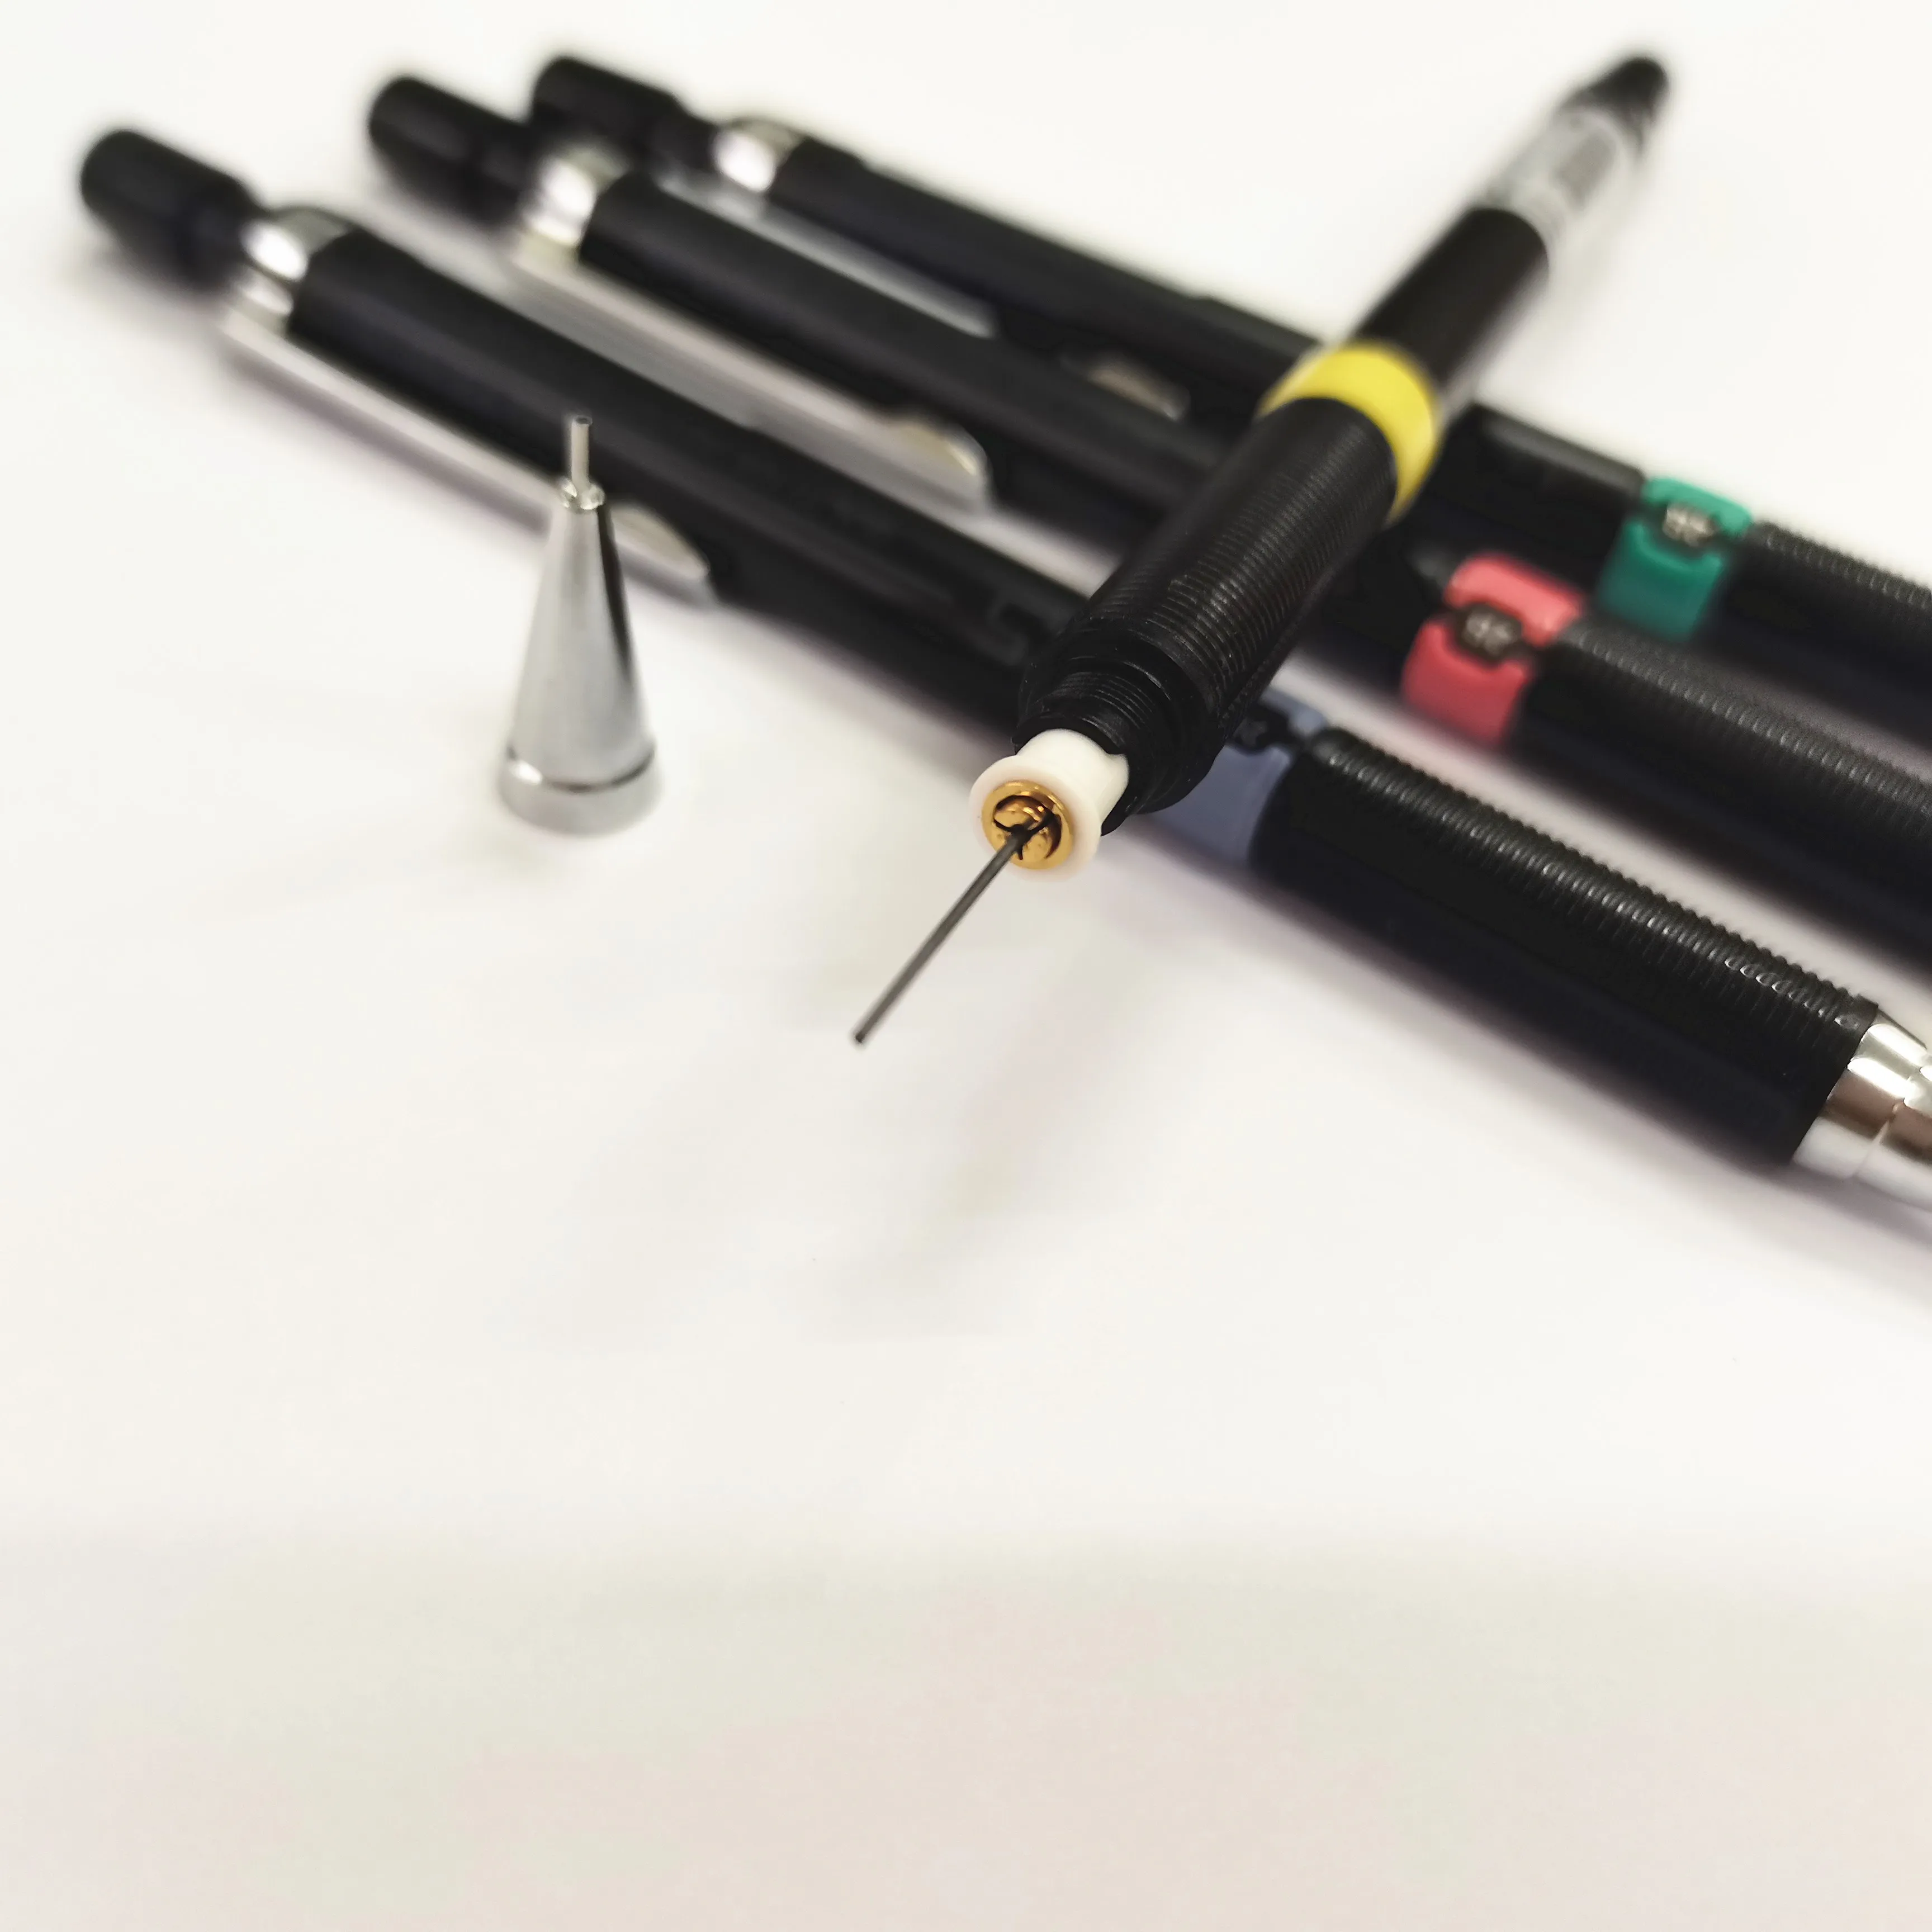 0.3/0.5/0.7/0.9 mm mechanical pencils with metal mechanism classic style